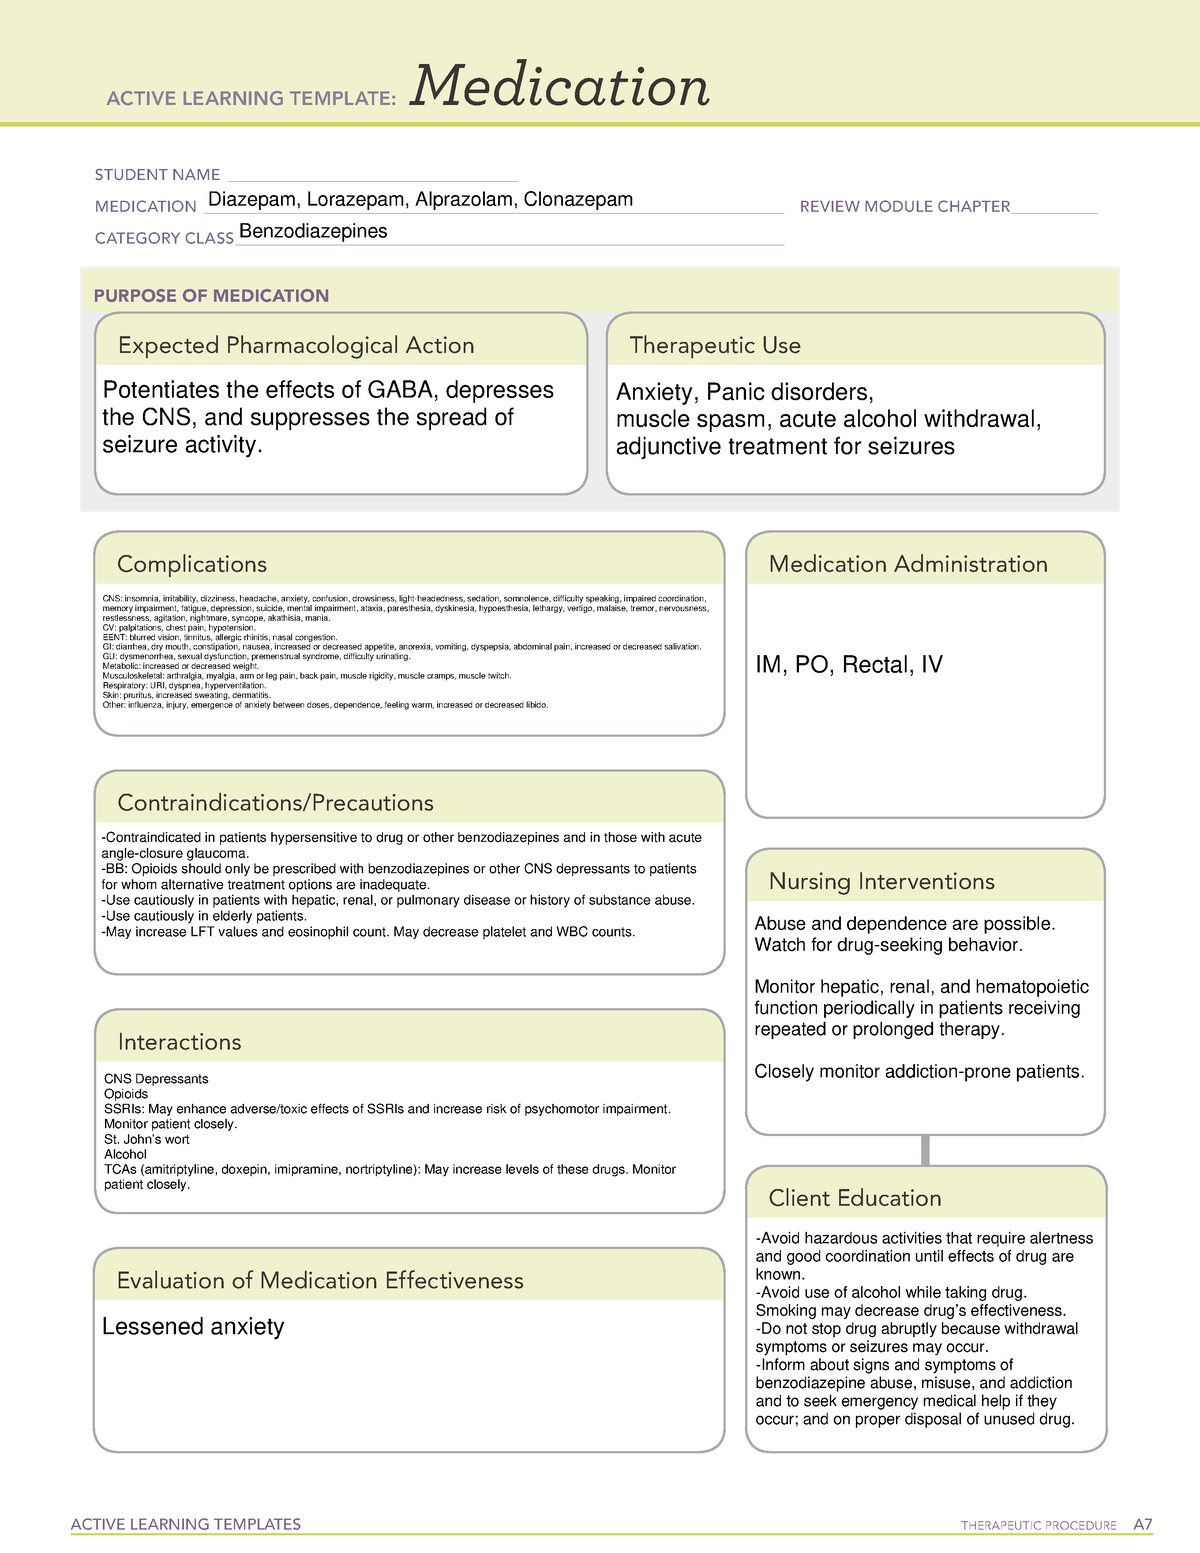 ATI medtemplate Benzodiazepines ACTIVE LEARNING TEMPLATES